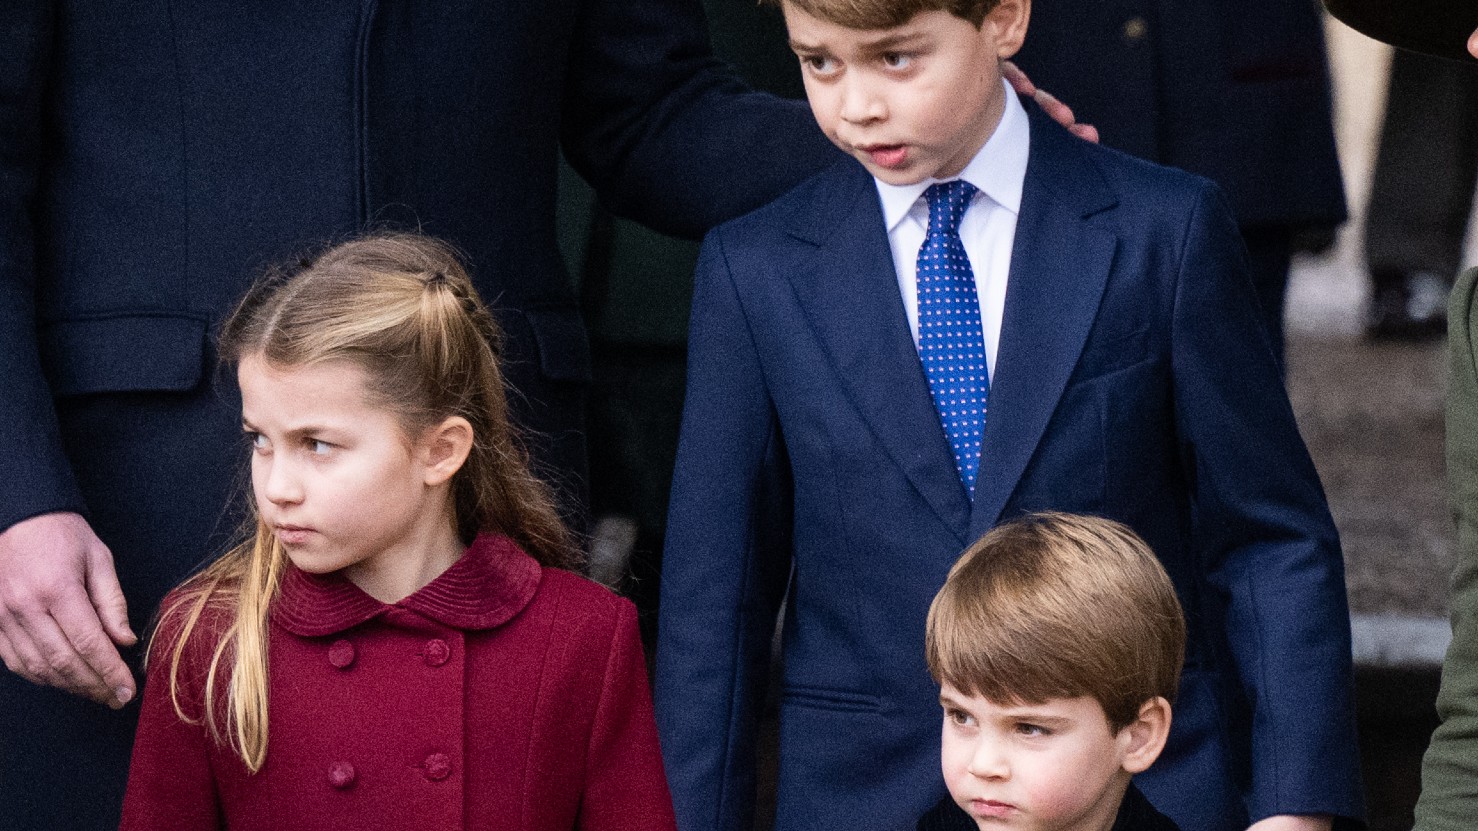 The Future of the Monarchy Could See Prince George, Princess Charlotte, and Prince Louis Working as a “Collective”